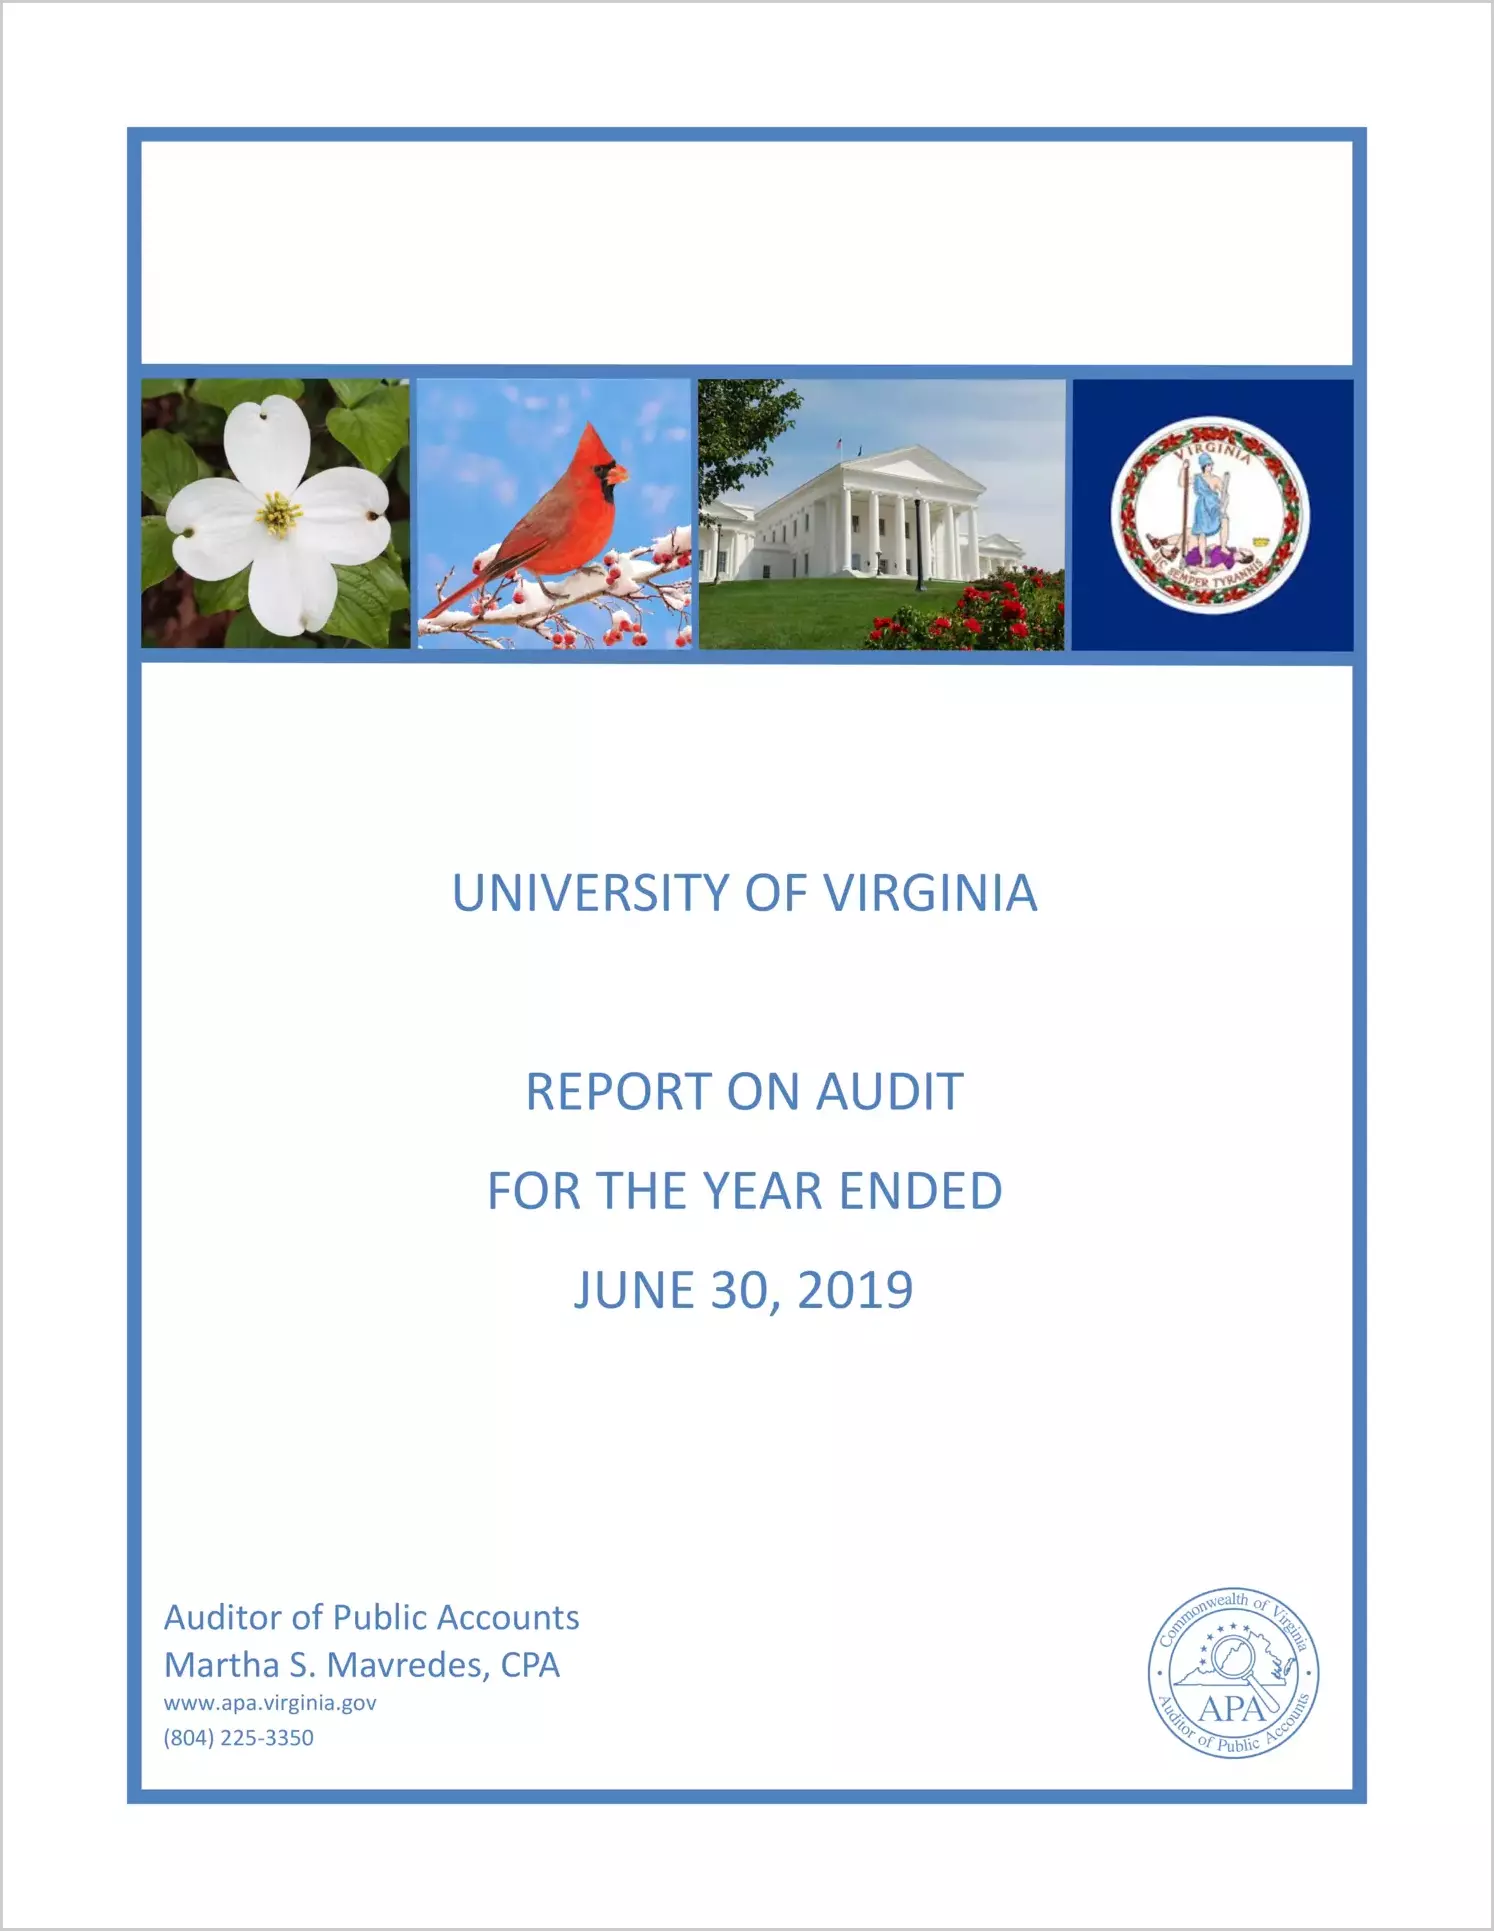 University of Virginia for the year ended June 30, 2019